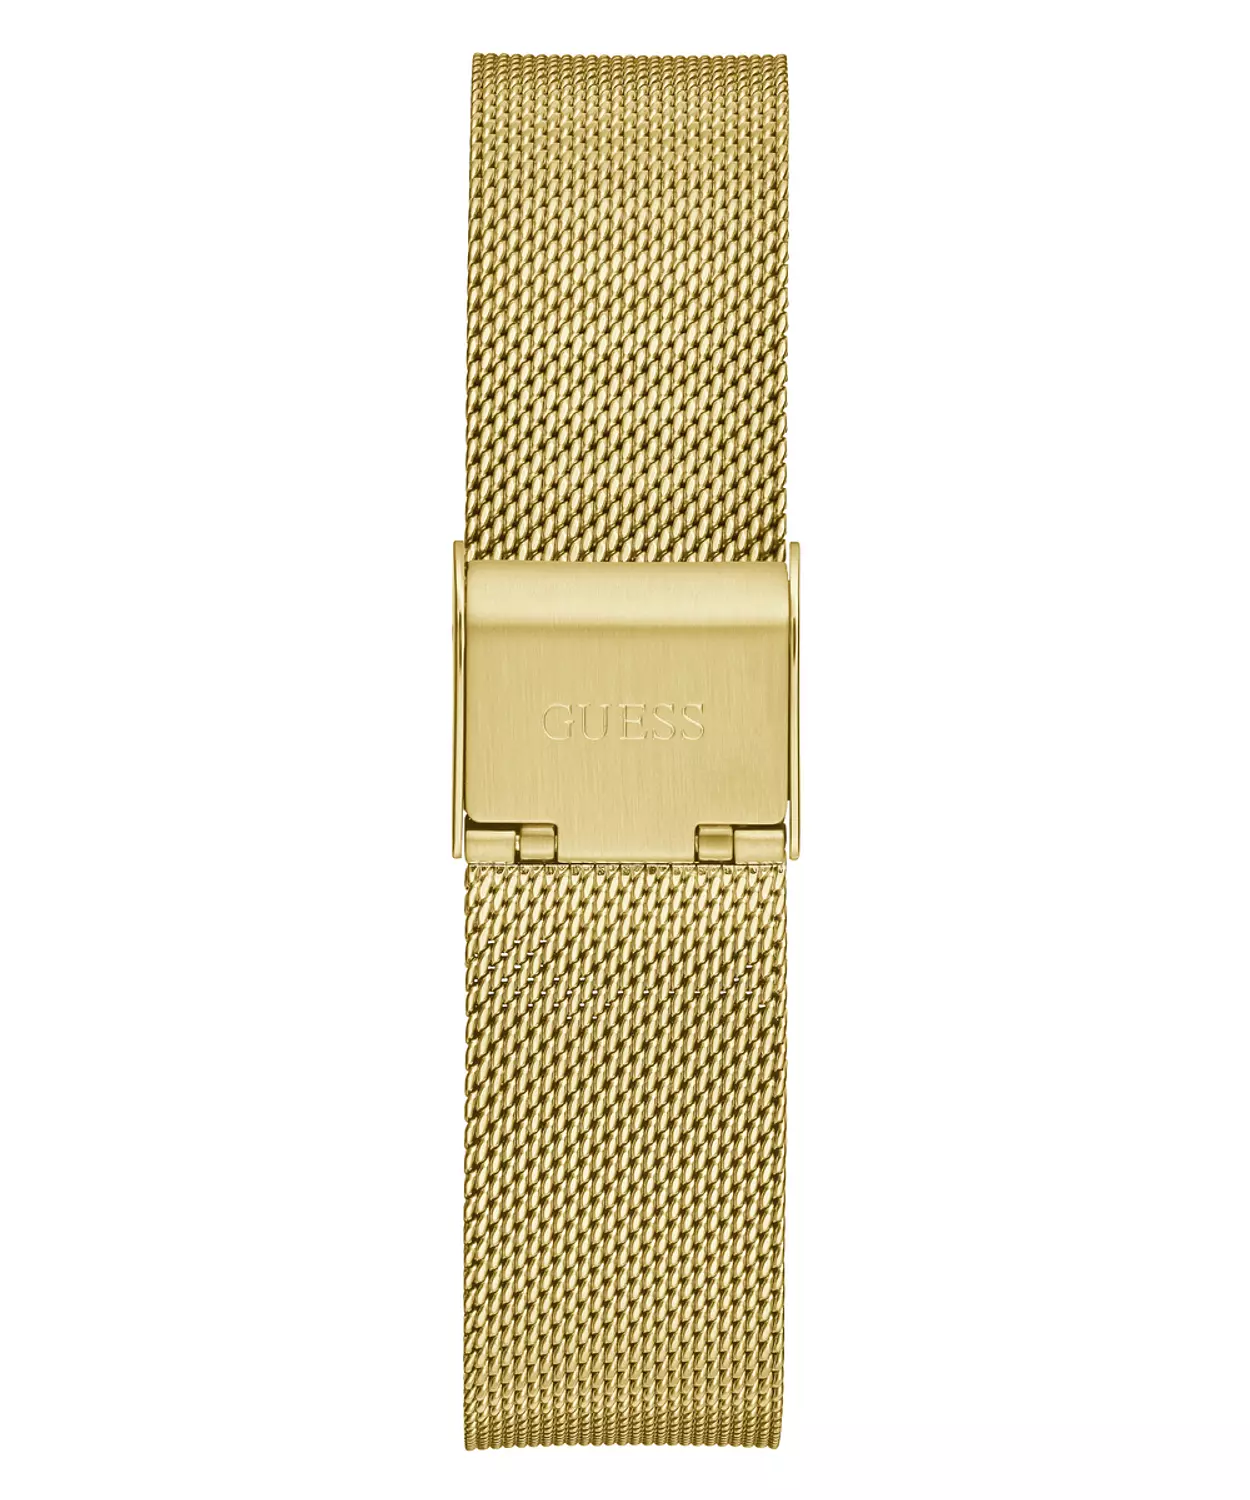 GUESS GW0477L2 ANALOG WATCH  For Women Gold Stainless Steel/Mesh Polished Bracelet  3